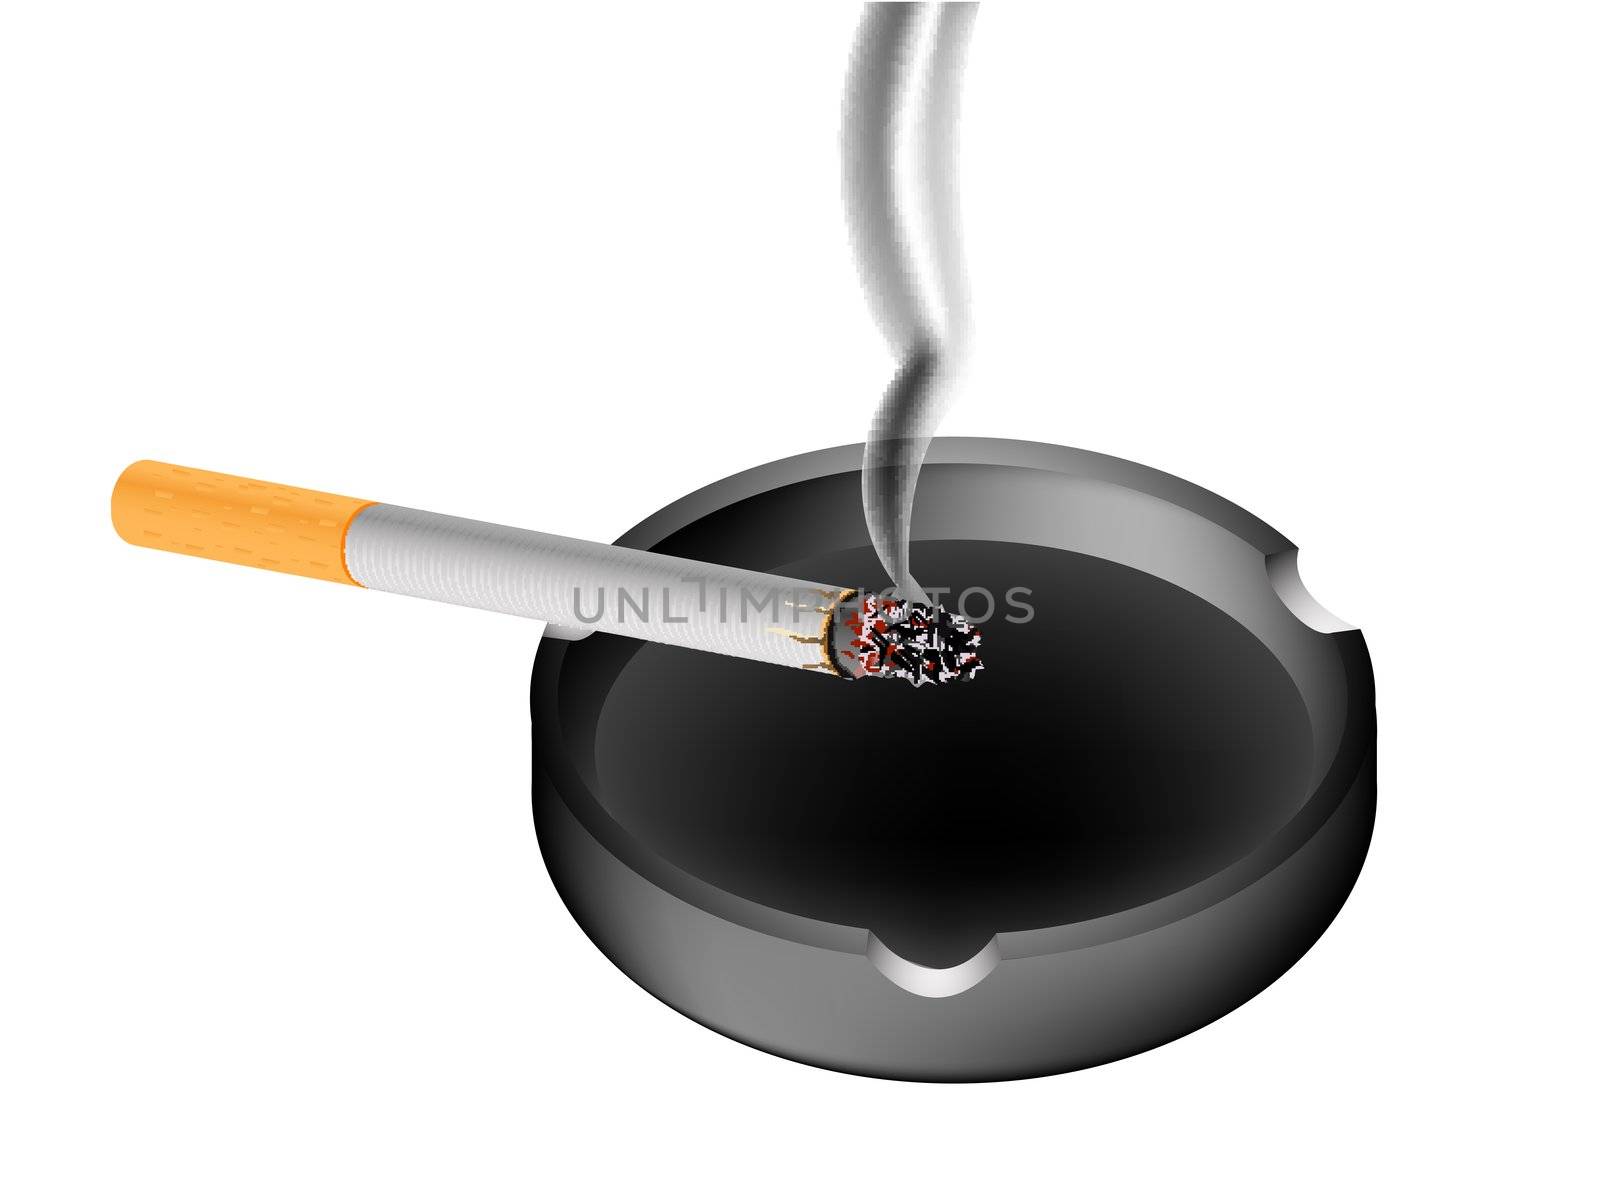 smoky cigarette and ashtray by robertosch